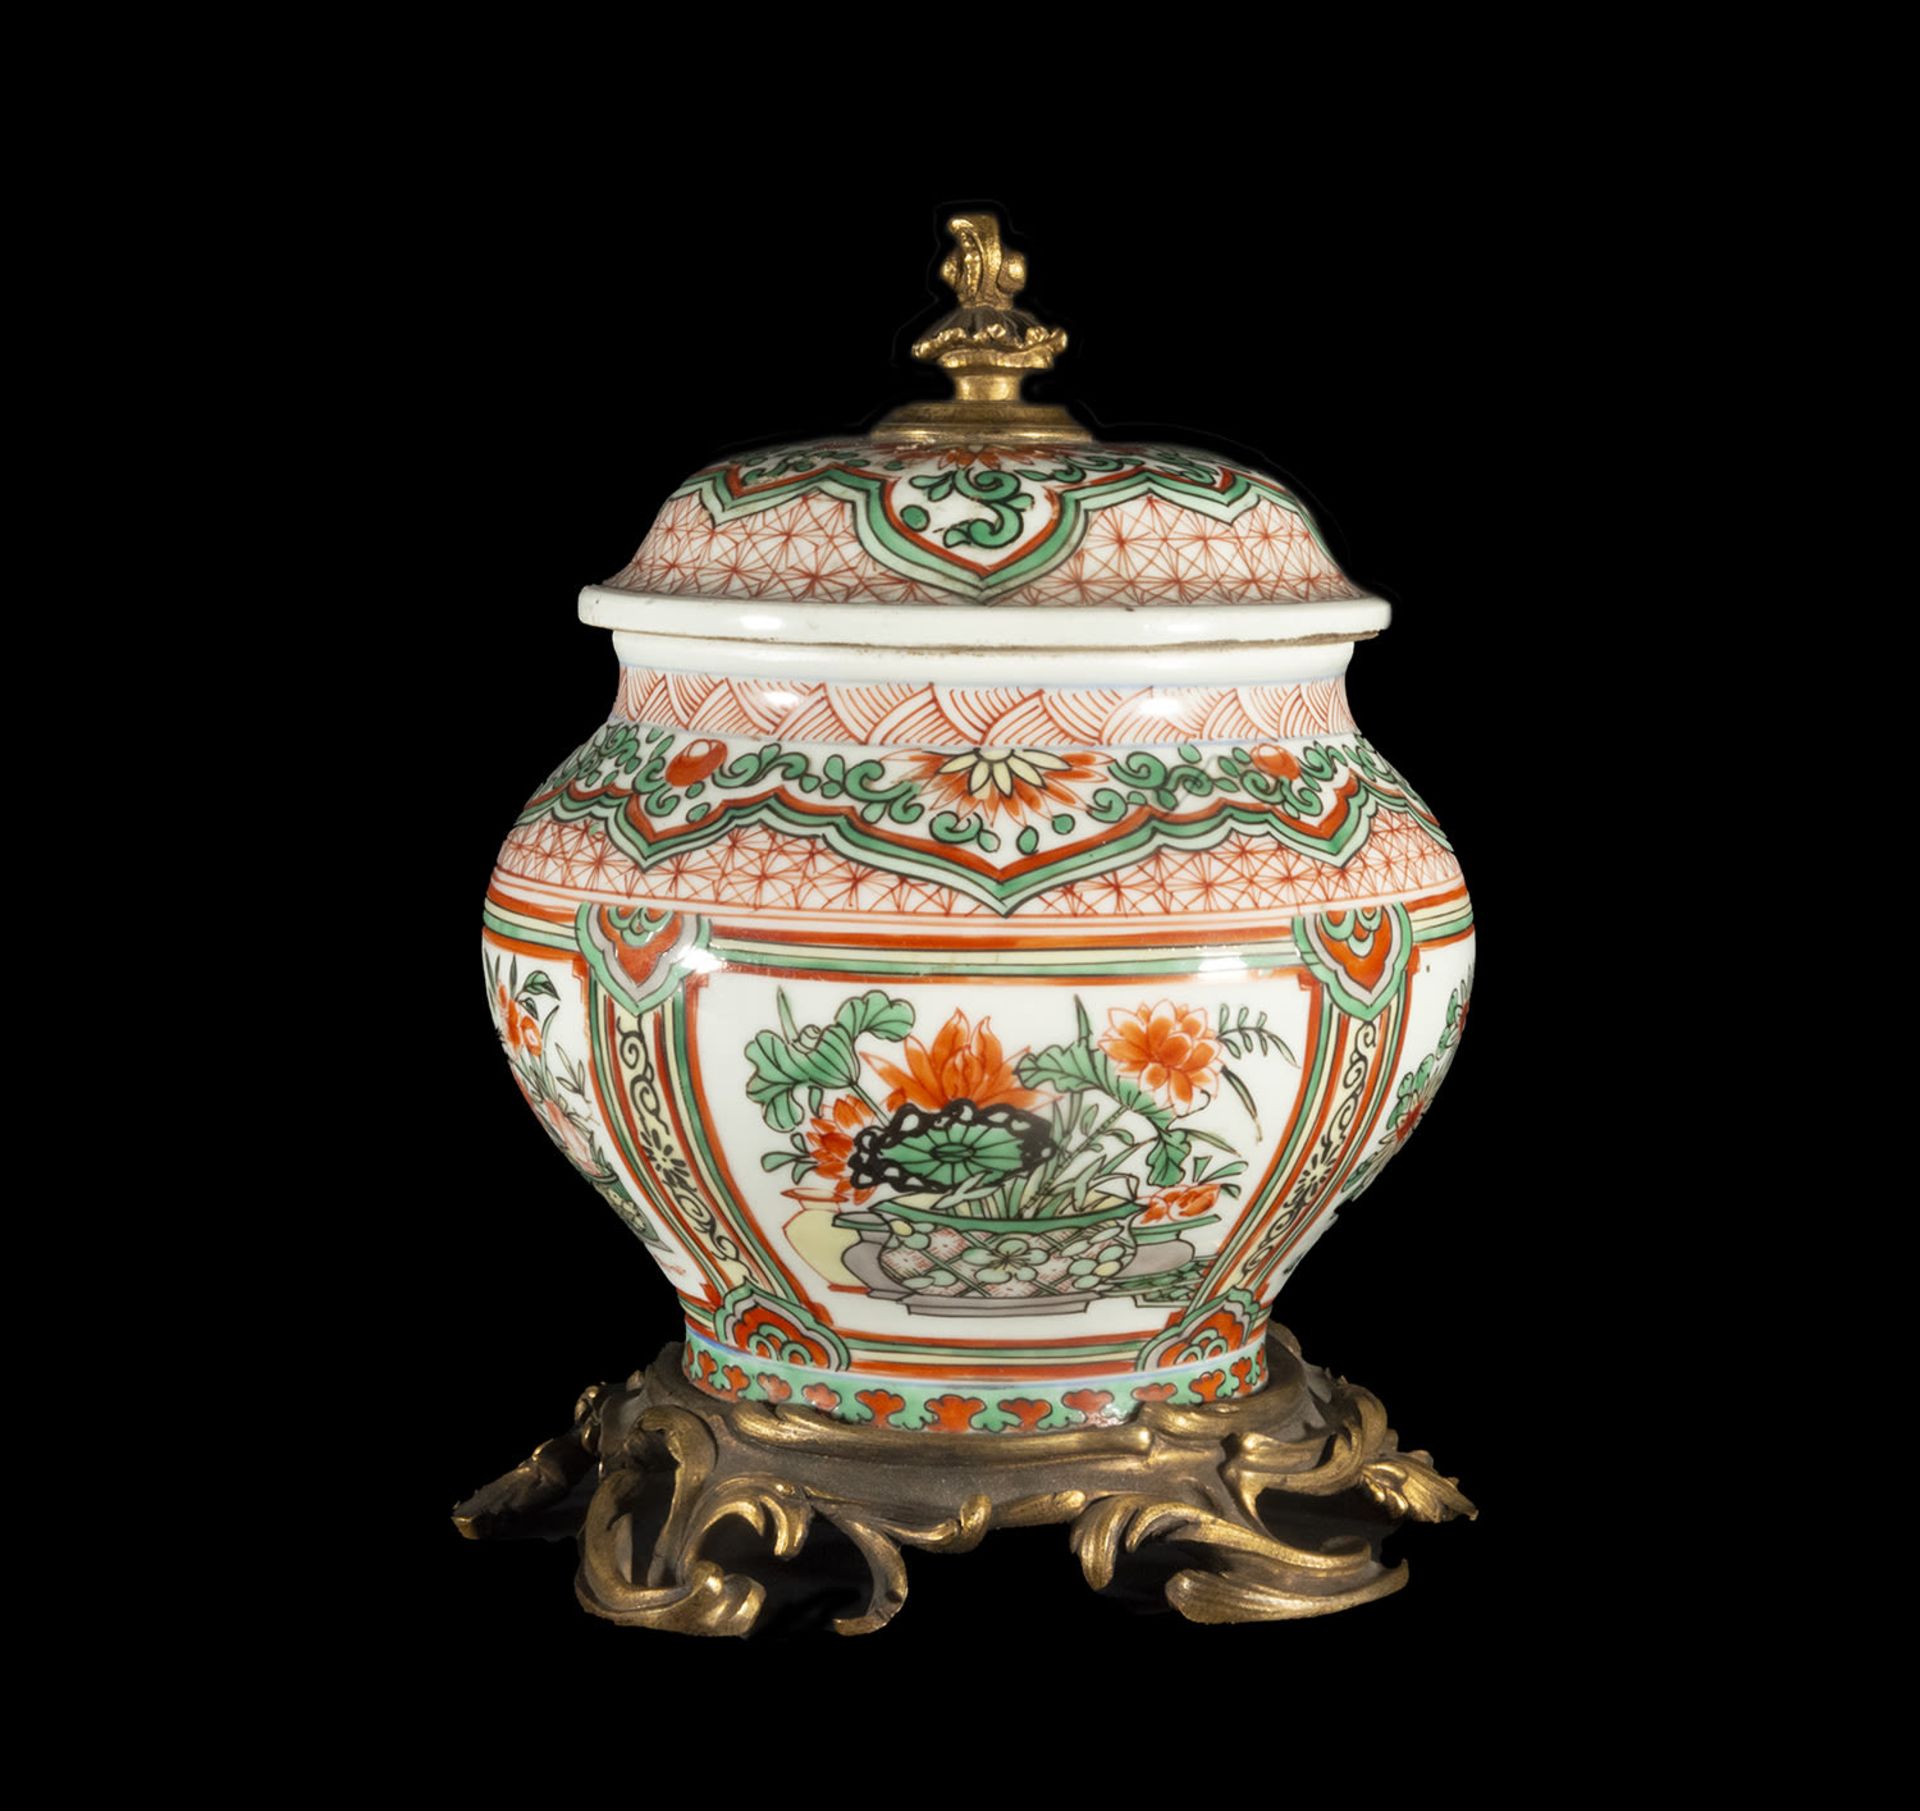 Potiche mounted in mercury-gilded bronze in Samson porcelain in the Chinese Kangxi famille verte sty - Image 2 of 4